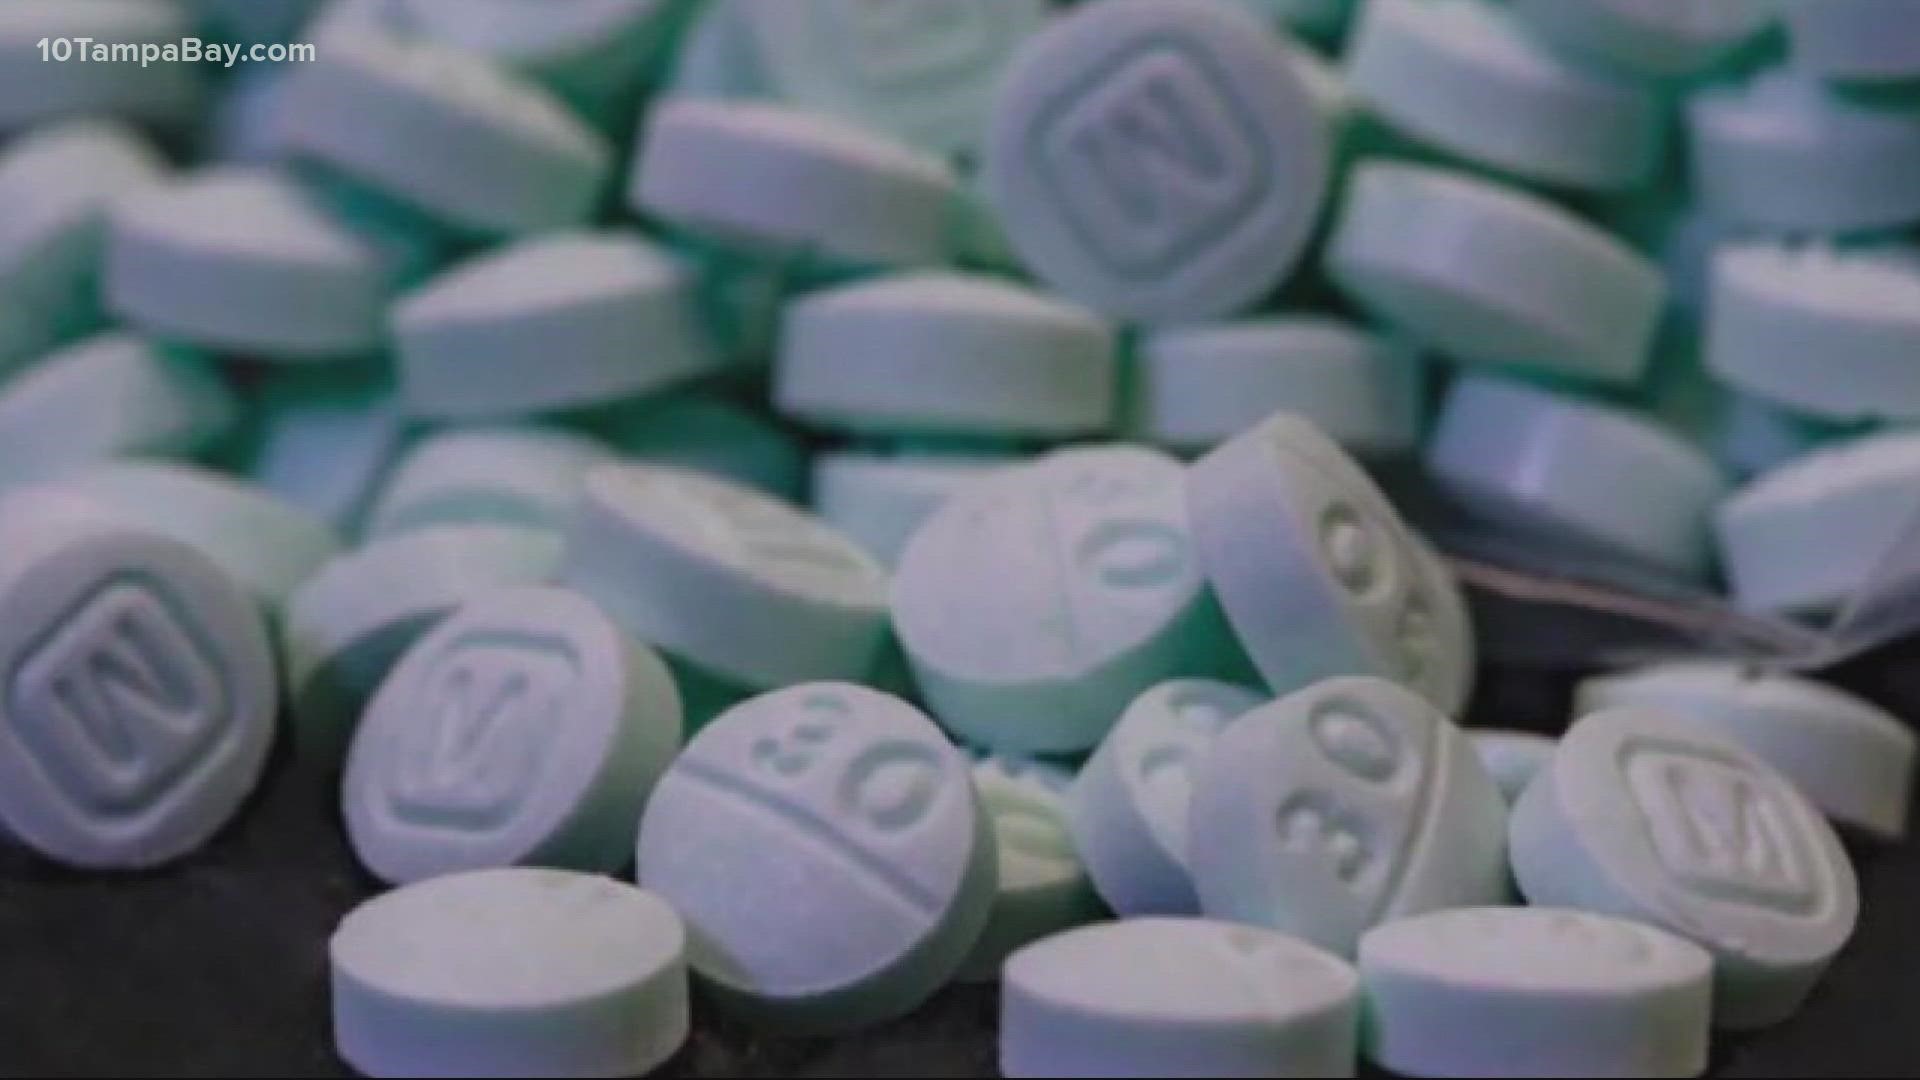 Commonly known as ISO, the synthetic opioid may be able to withstand Narcan.